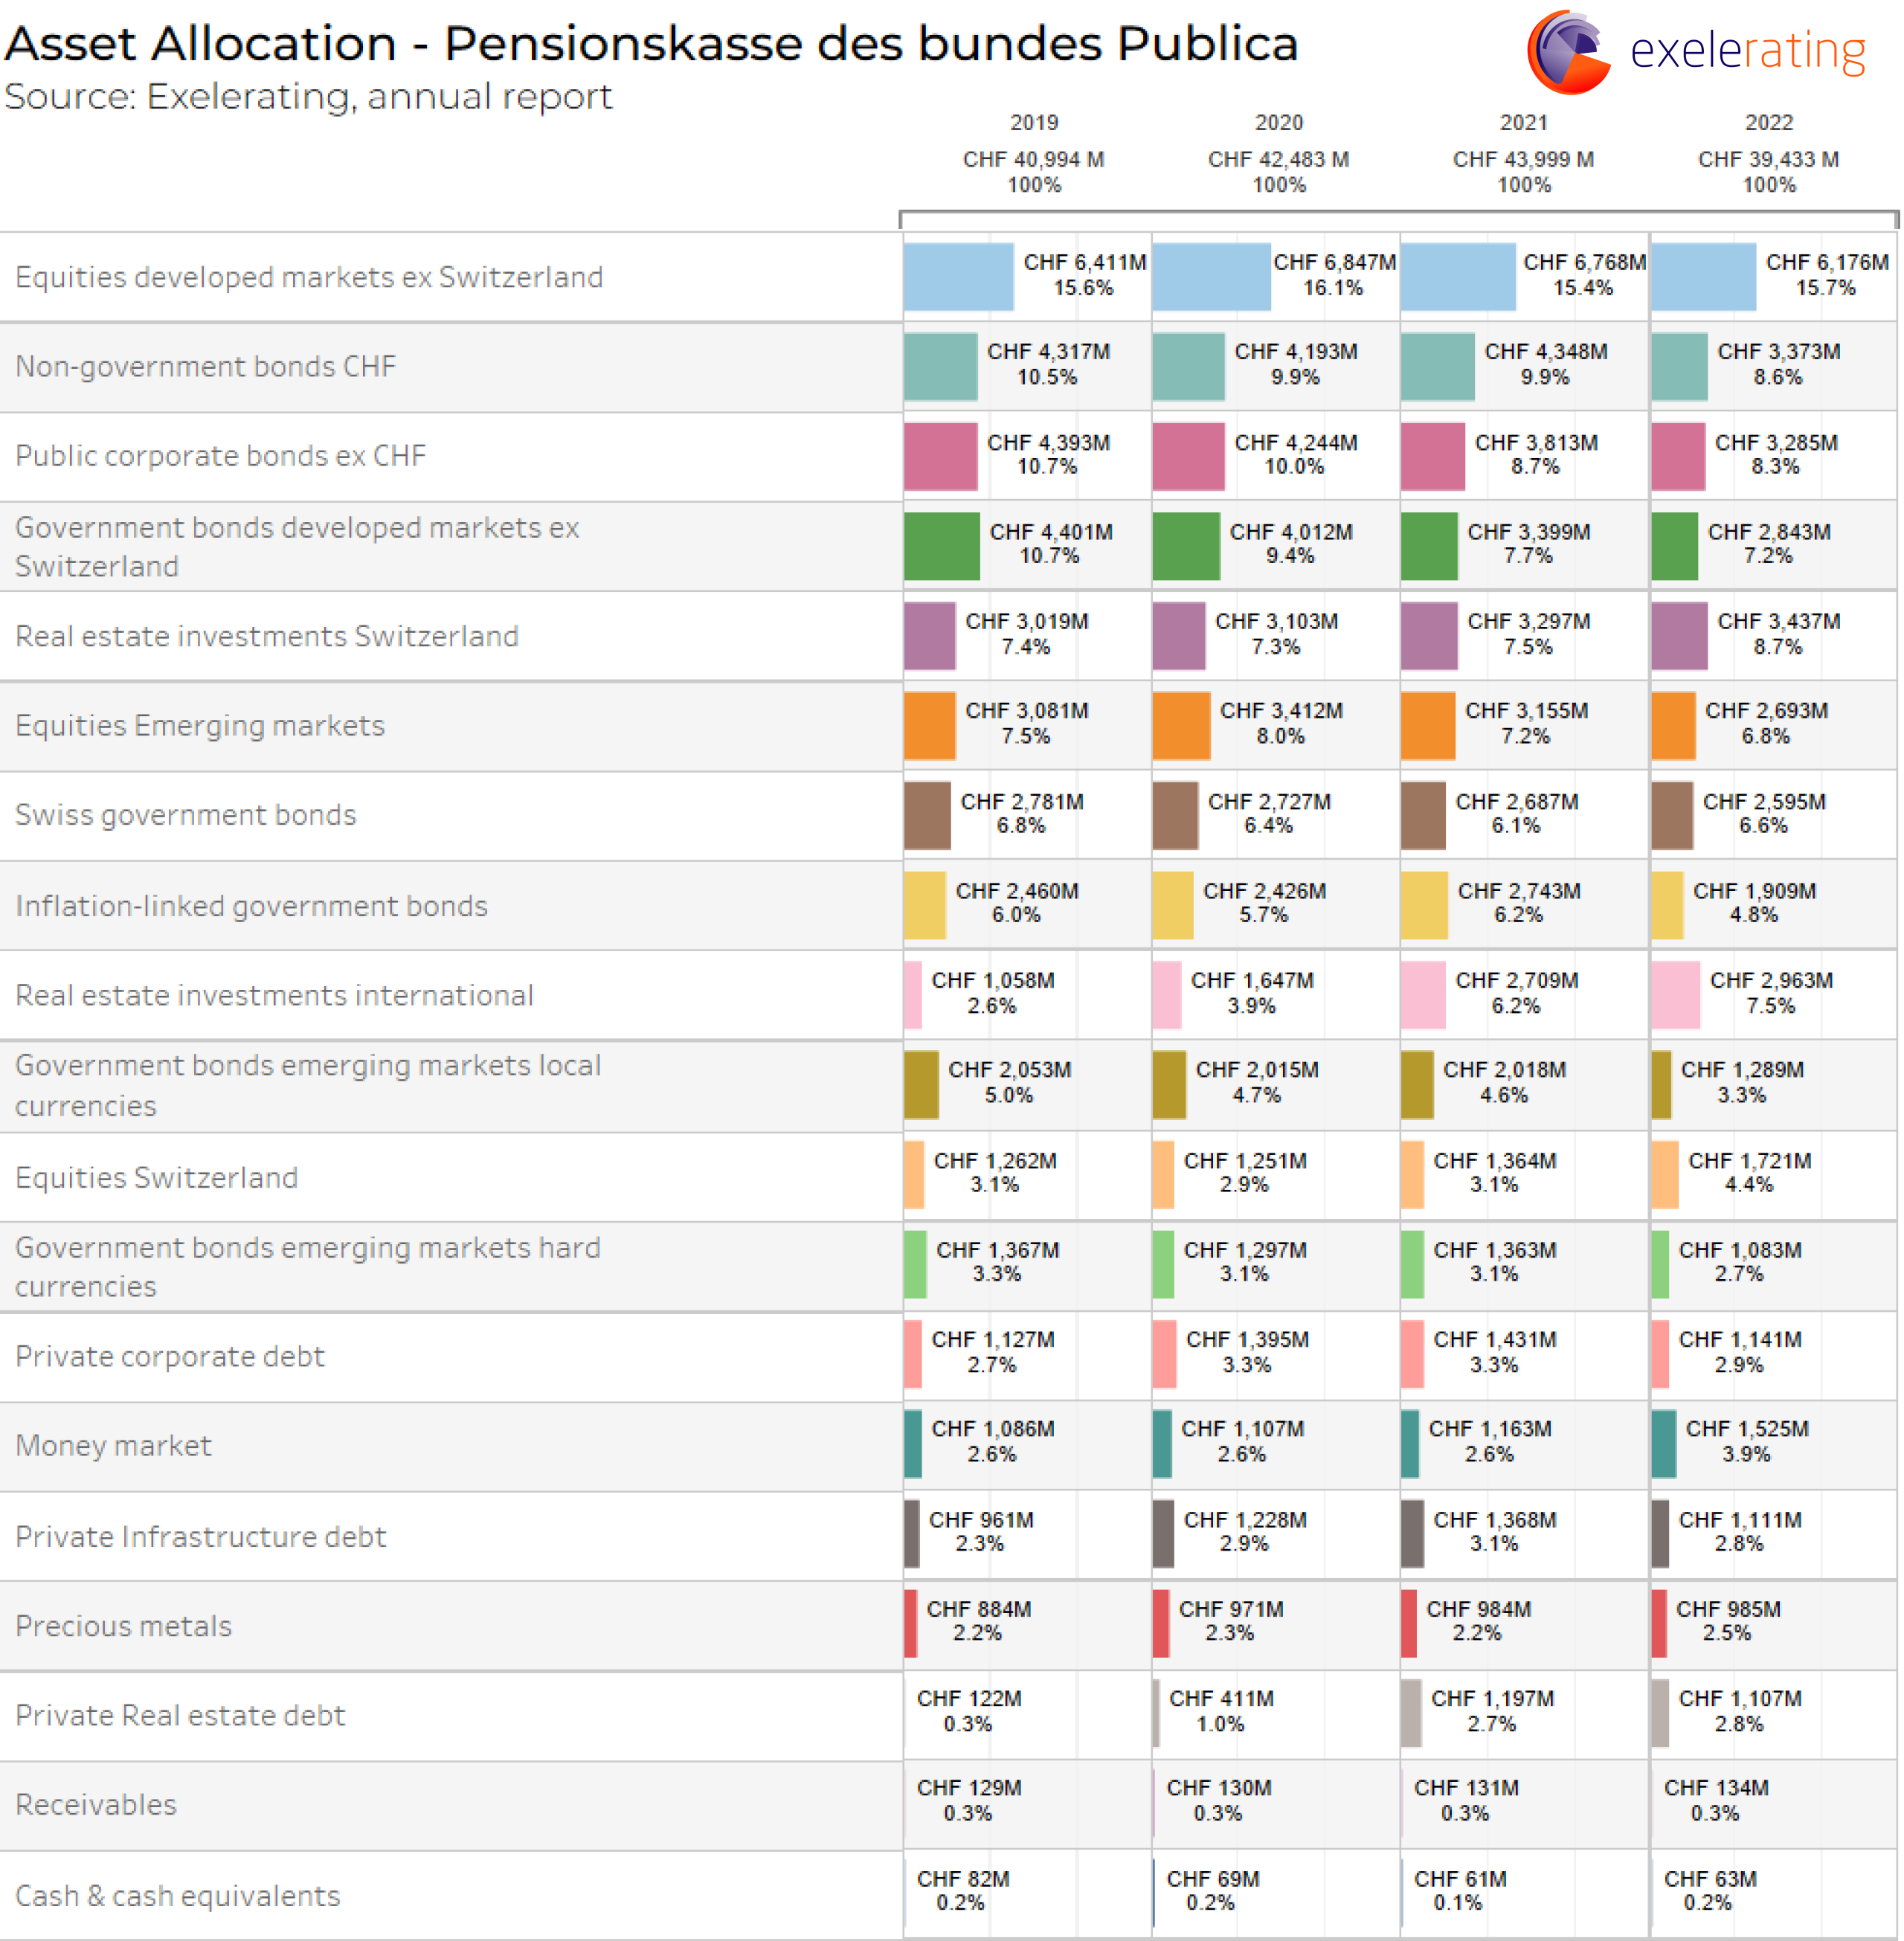 Breakdown of the asset allocation of pensionkasse de bundes publica in a horizontal bar chart.